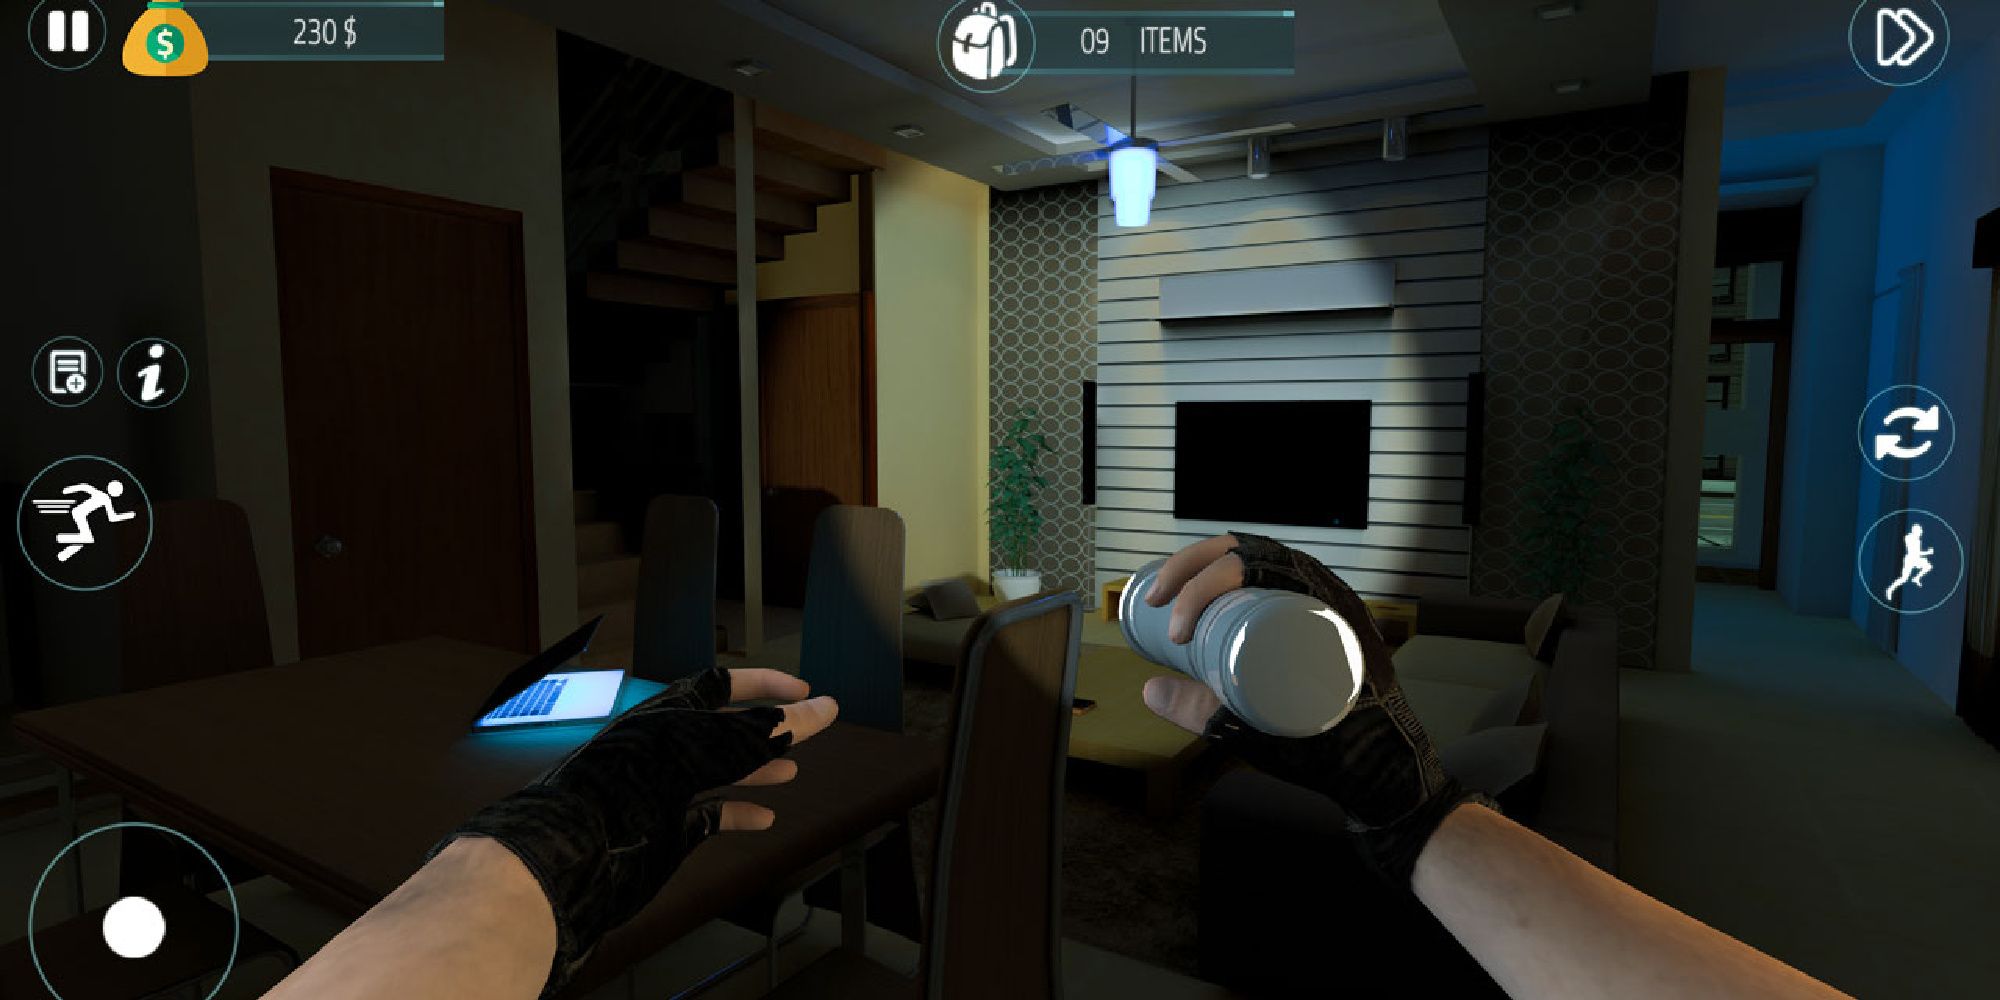 Gameplay of the game Sneak Thief